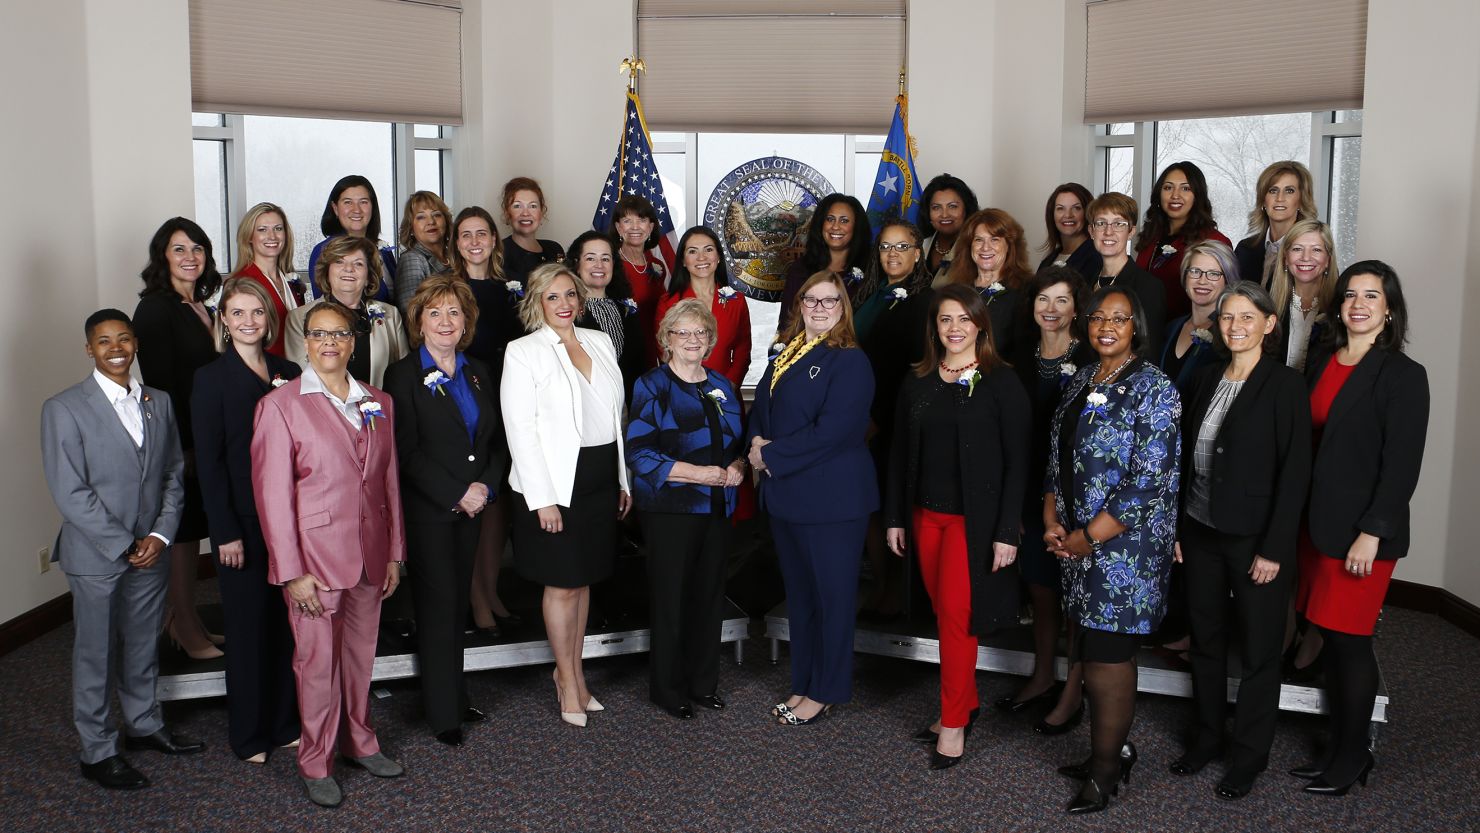 Thirty-two female members of the Nevada Legislature pose before the start of the state's legislative session in Carson City on Monday. The group represents the first female-majority legislature in the country. 